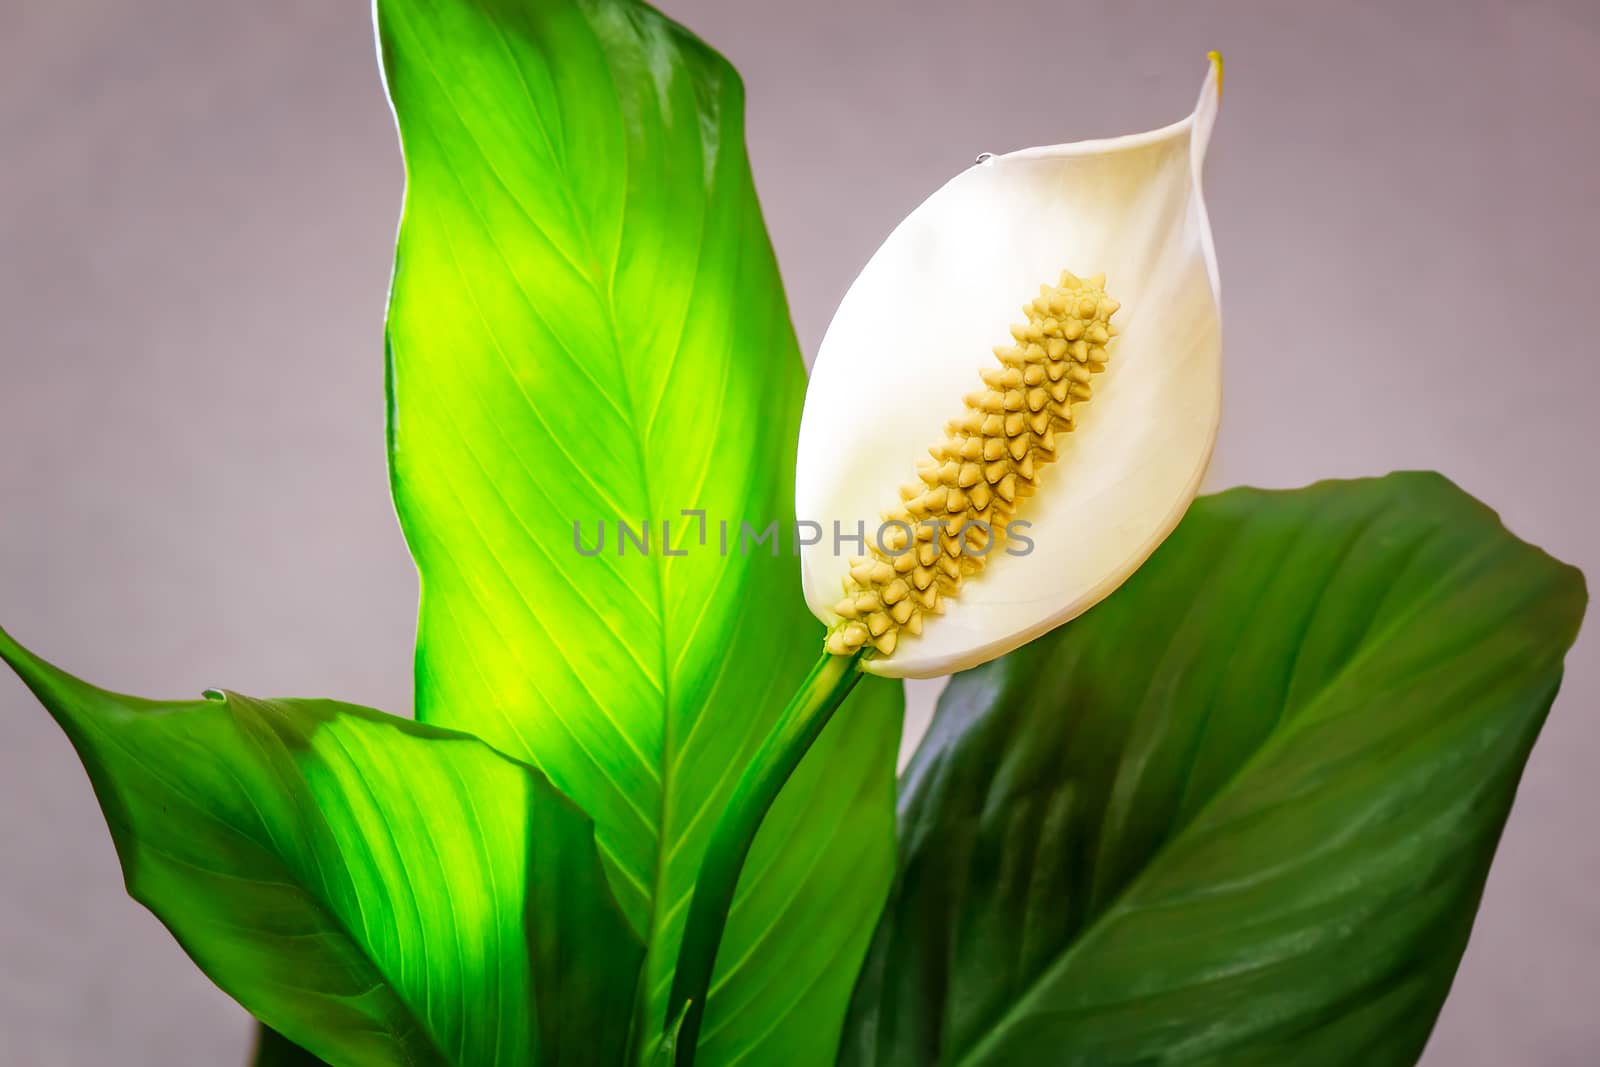 Calla is a beautiful and original white flower among large green leaves. Presents closeup.